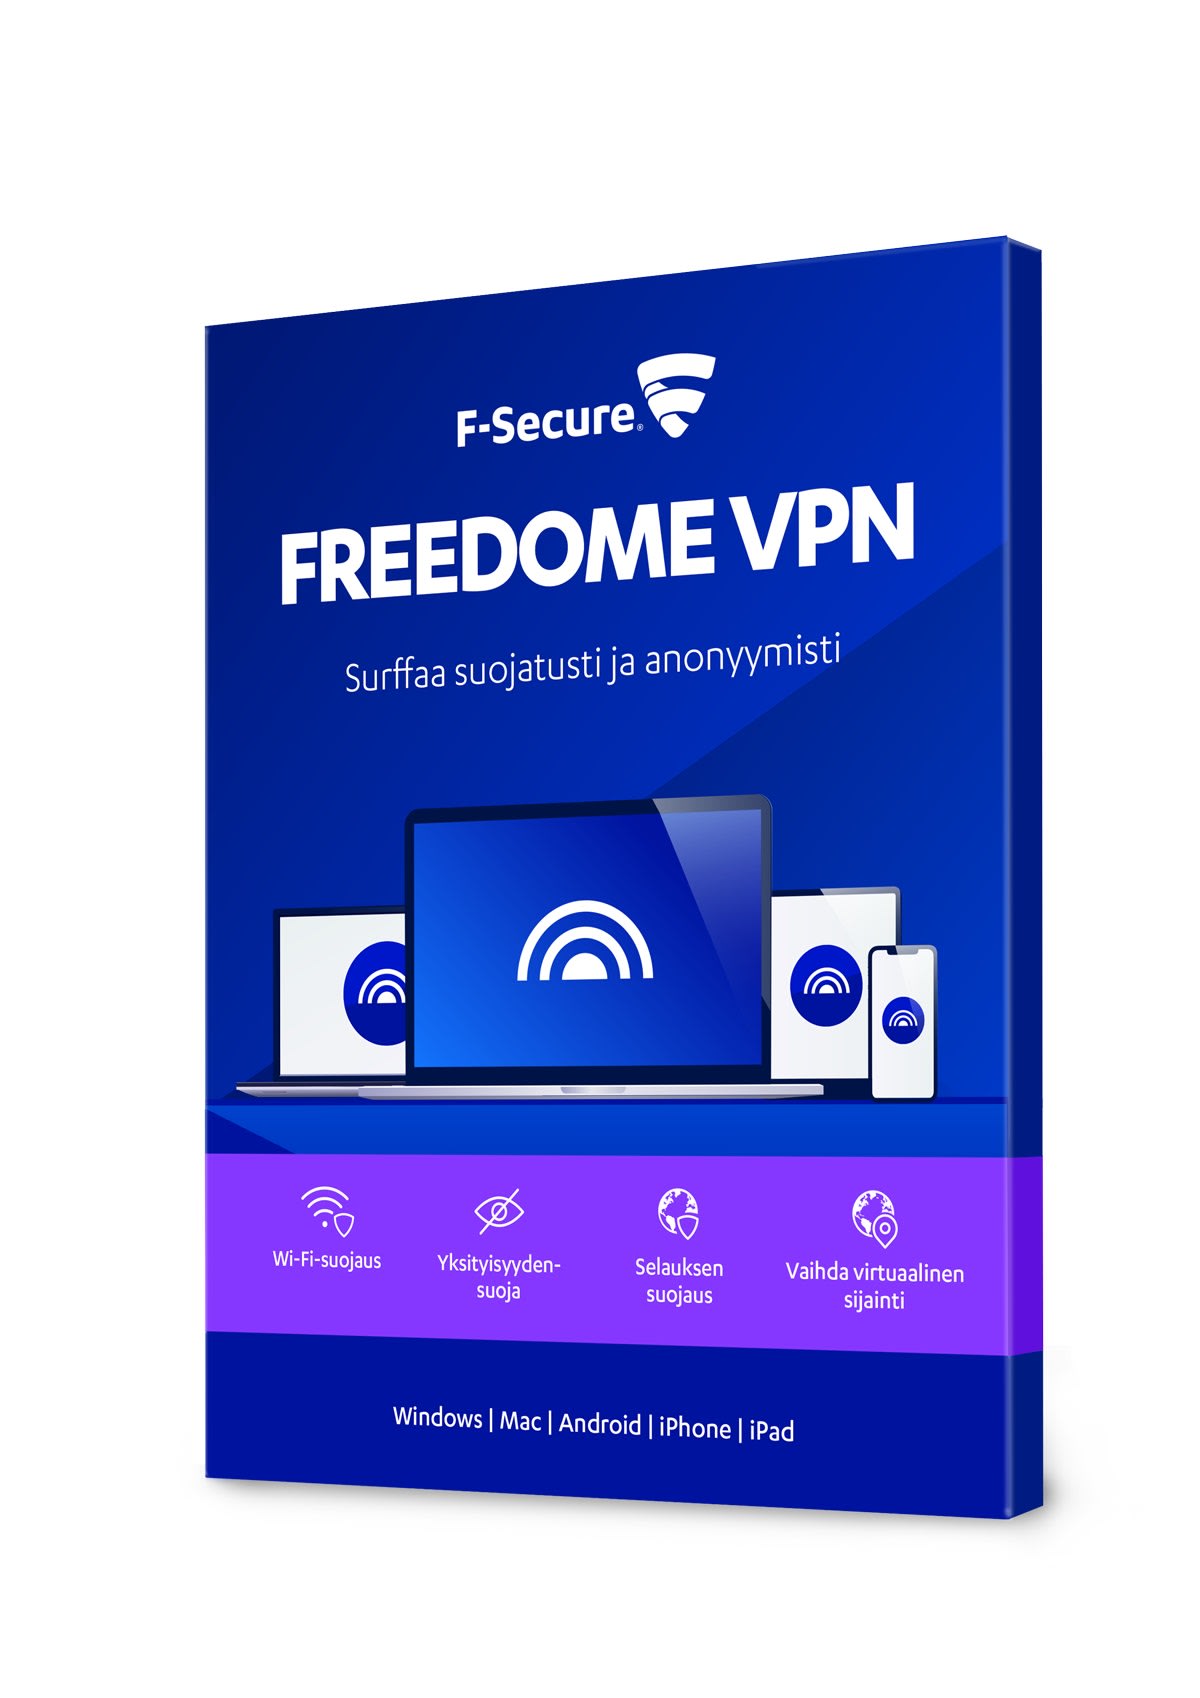 download the new F-Secure Freedome VPN 2.69.35